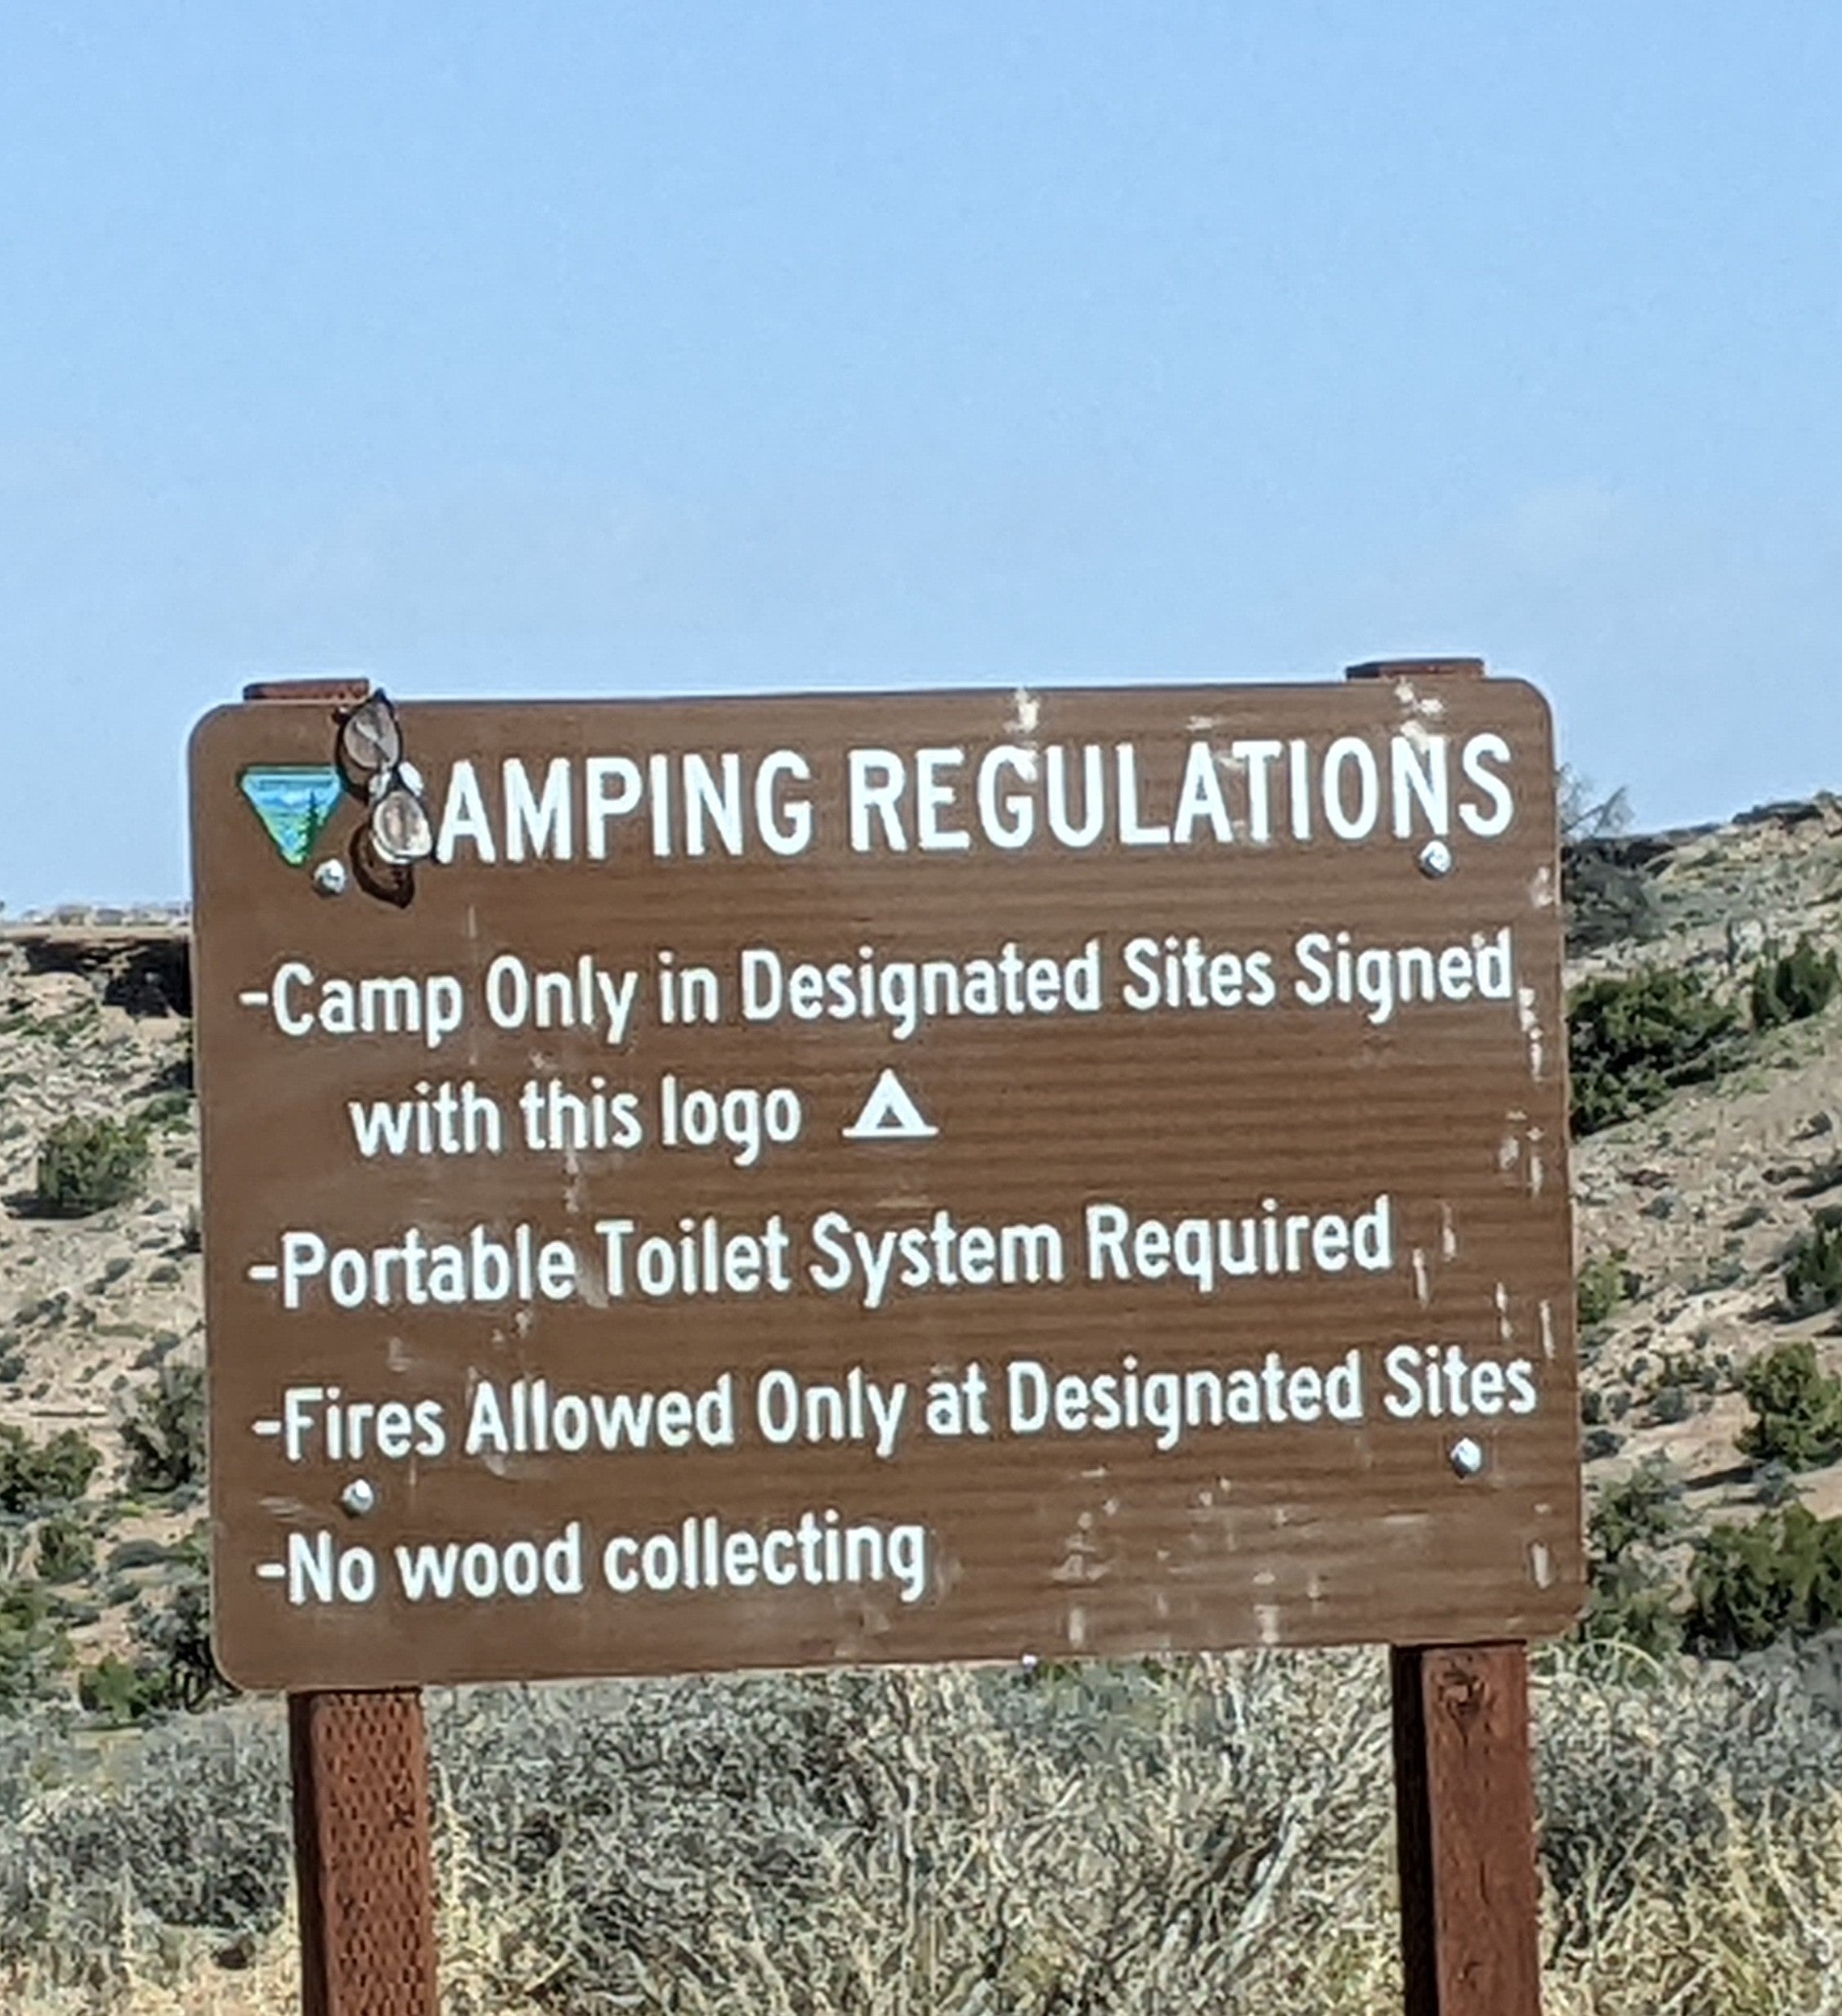 Camper submitted image from BLM Bartlett Wash Dispersed Camping - 2